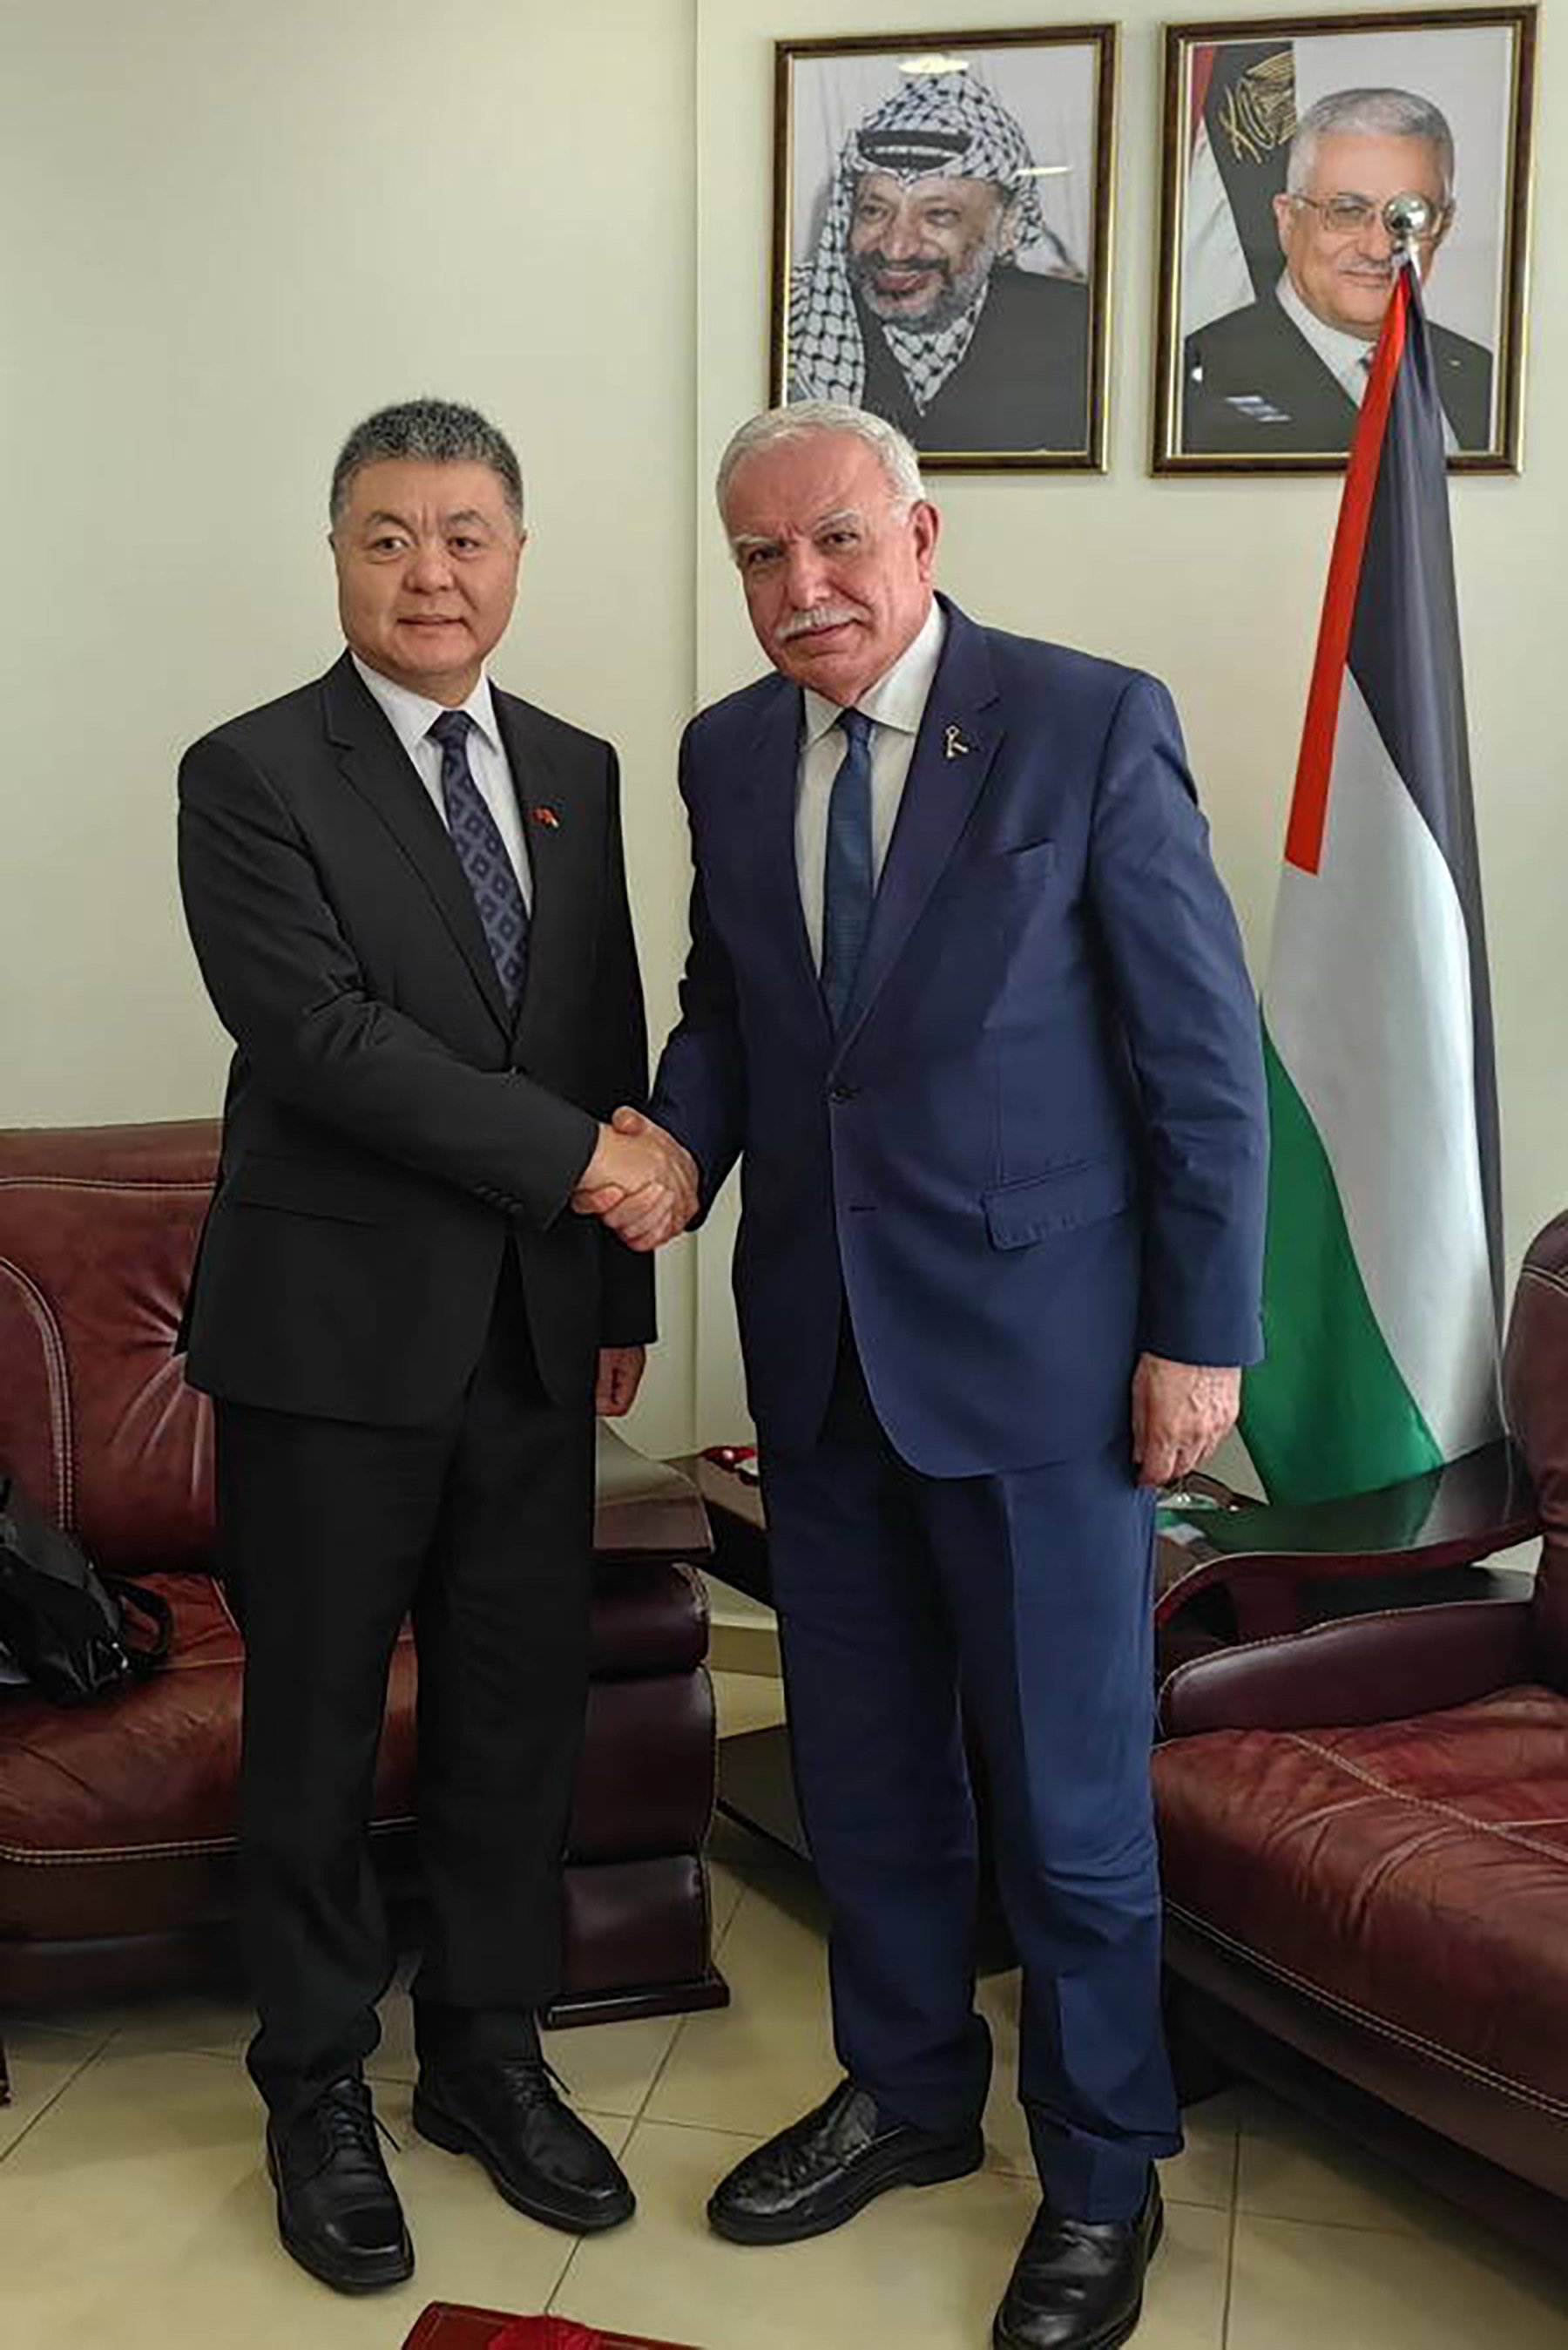 Chinese foreign ministry envoy Wang Kejian meets the Palestinian Authority’s foreign minister, Riyad al-Maliki, in Ramallah in the West Bank on Wednesday. Photo: Handout